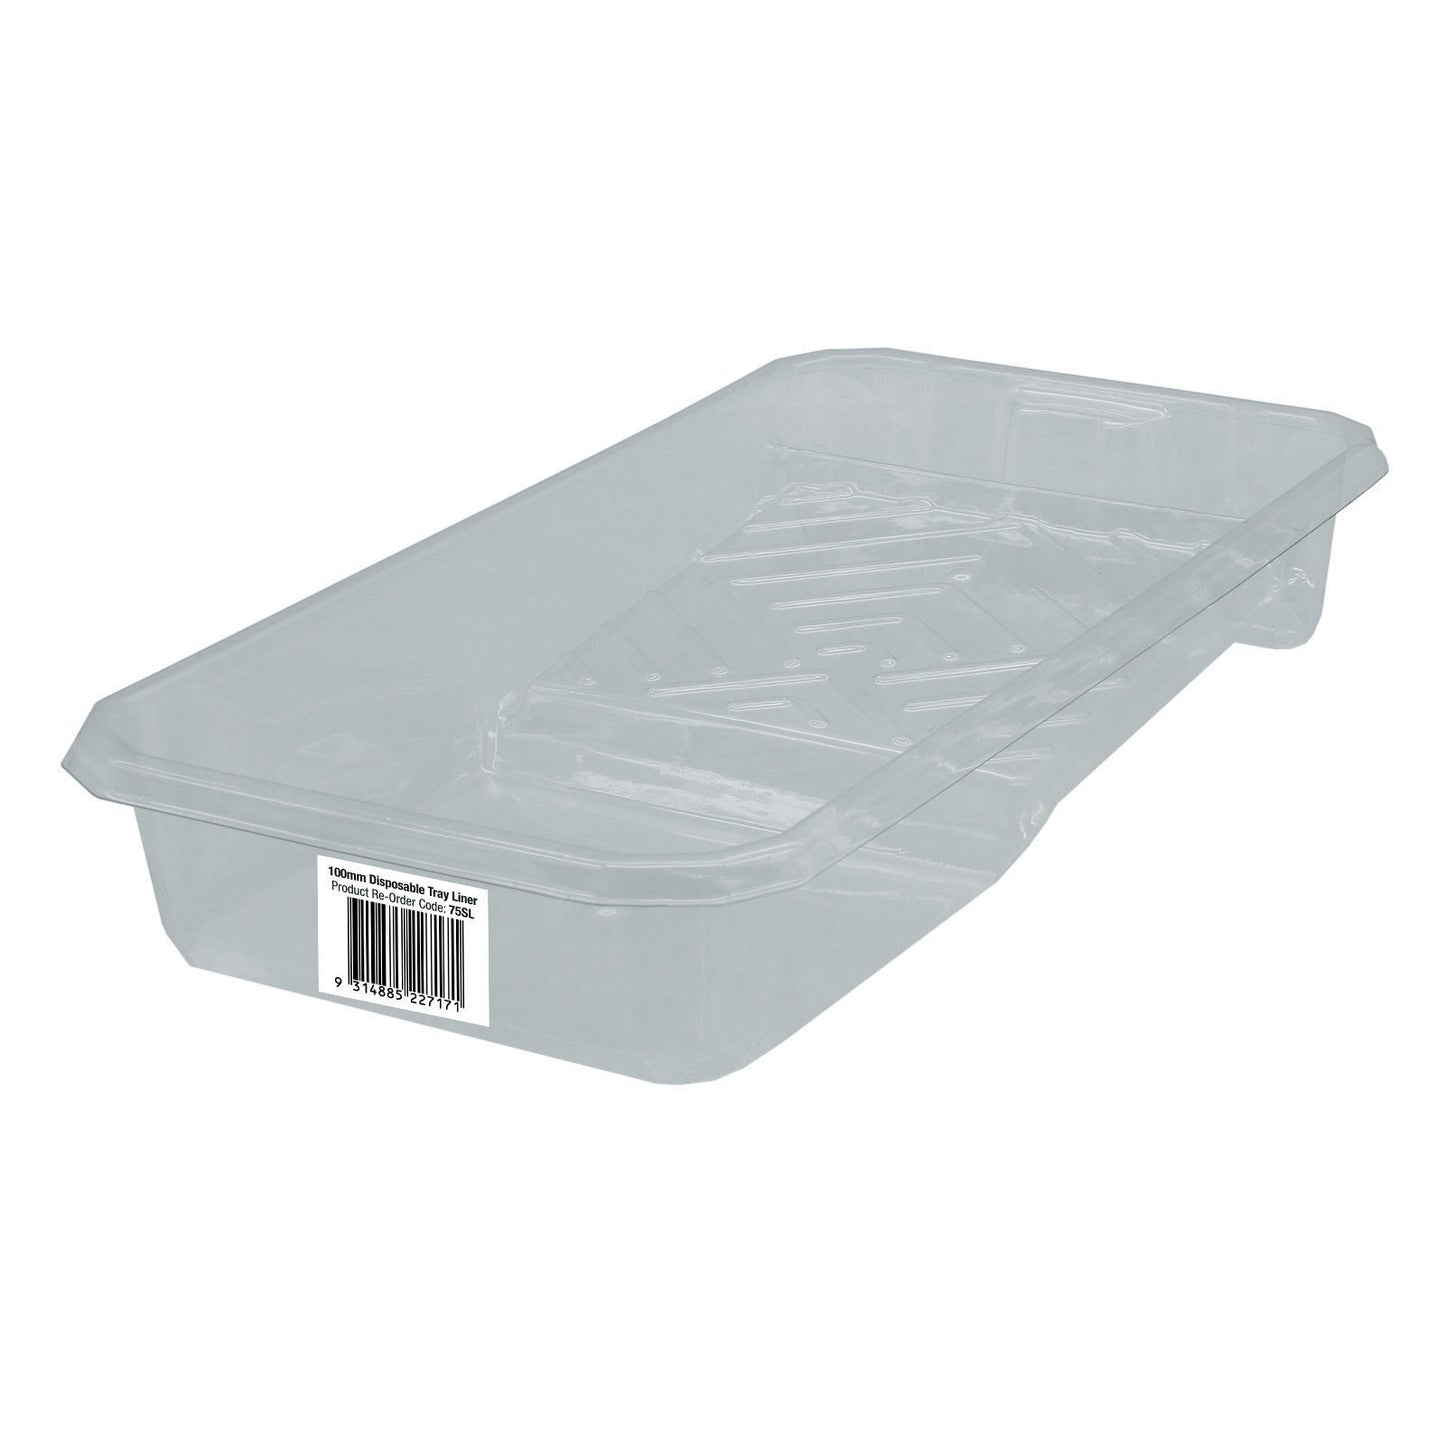 UNi-Pro DISPOSABLE PAINT TRAY LINER 100mm 5 PACK